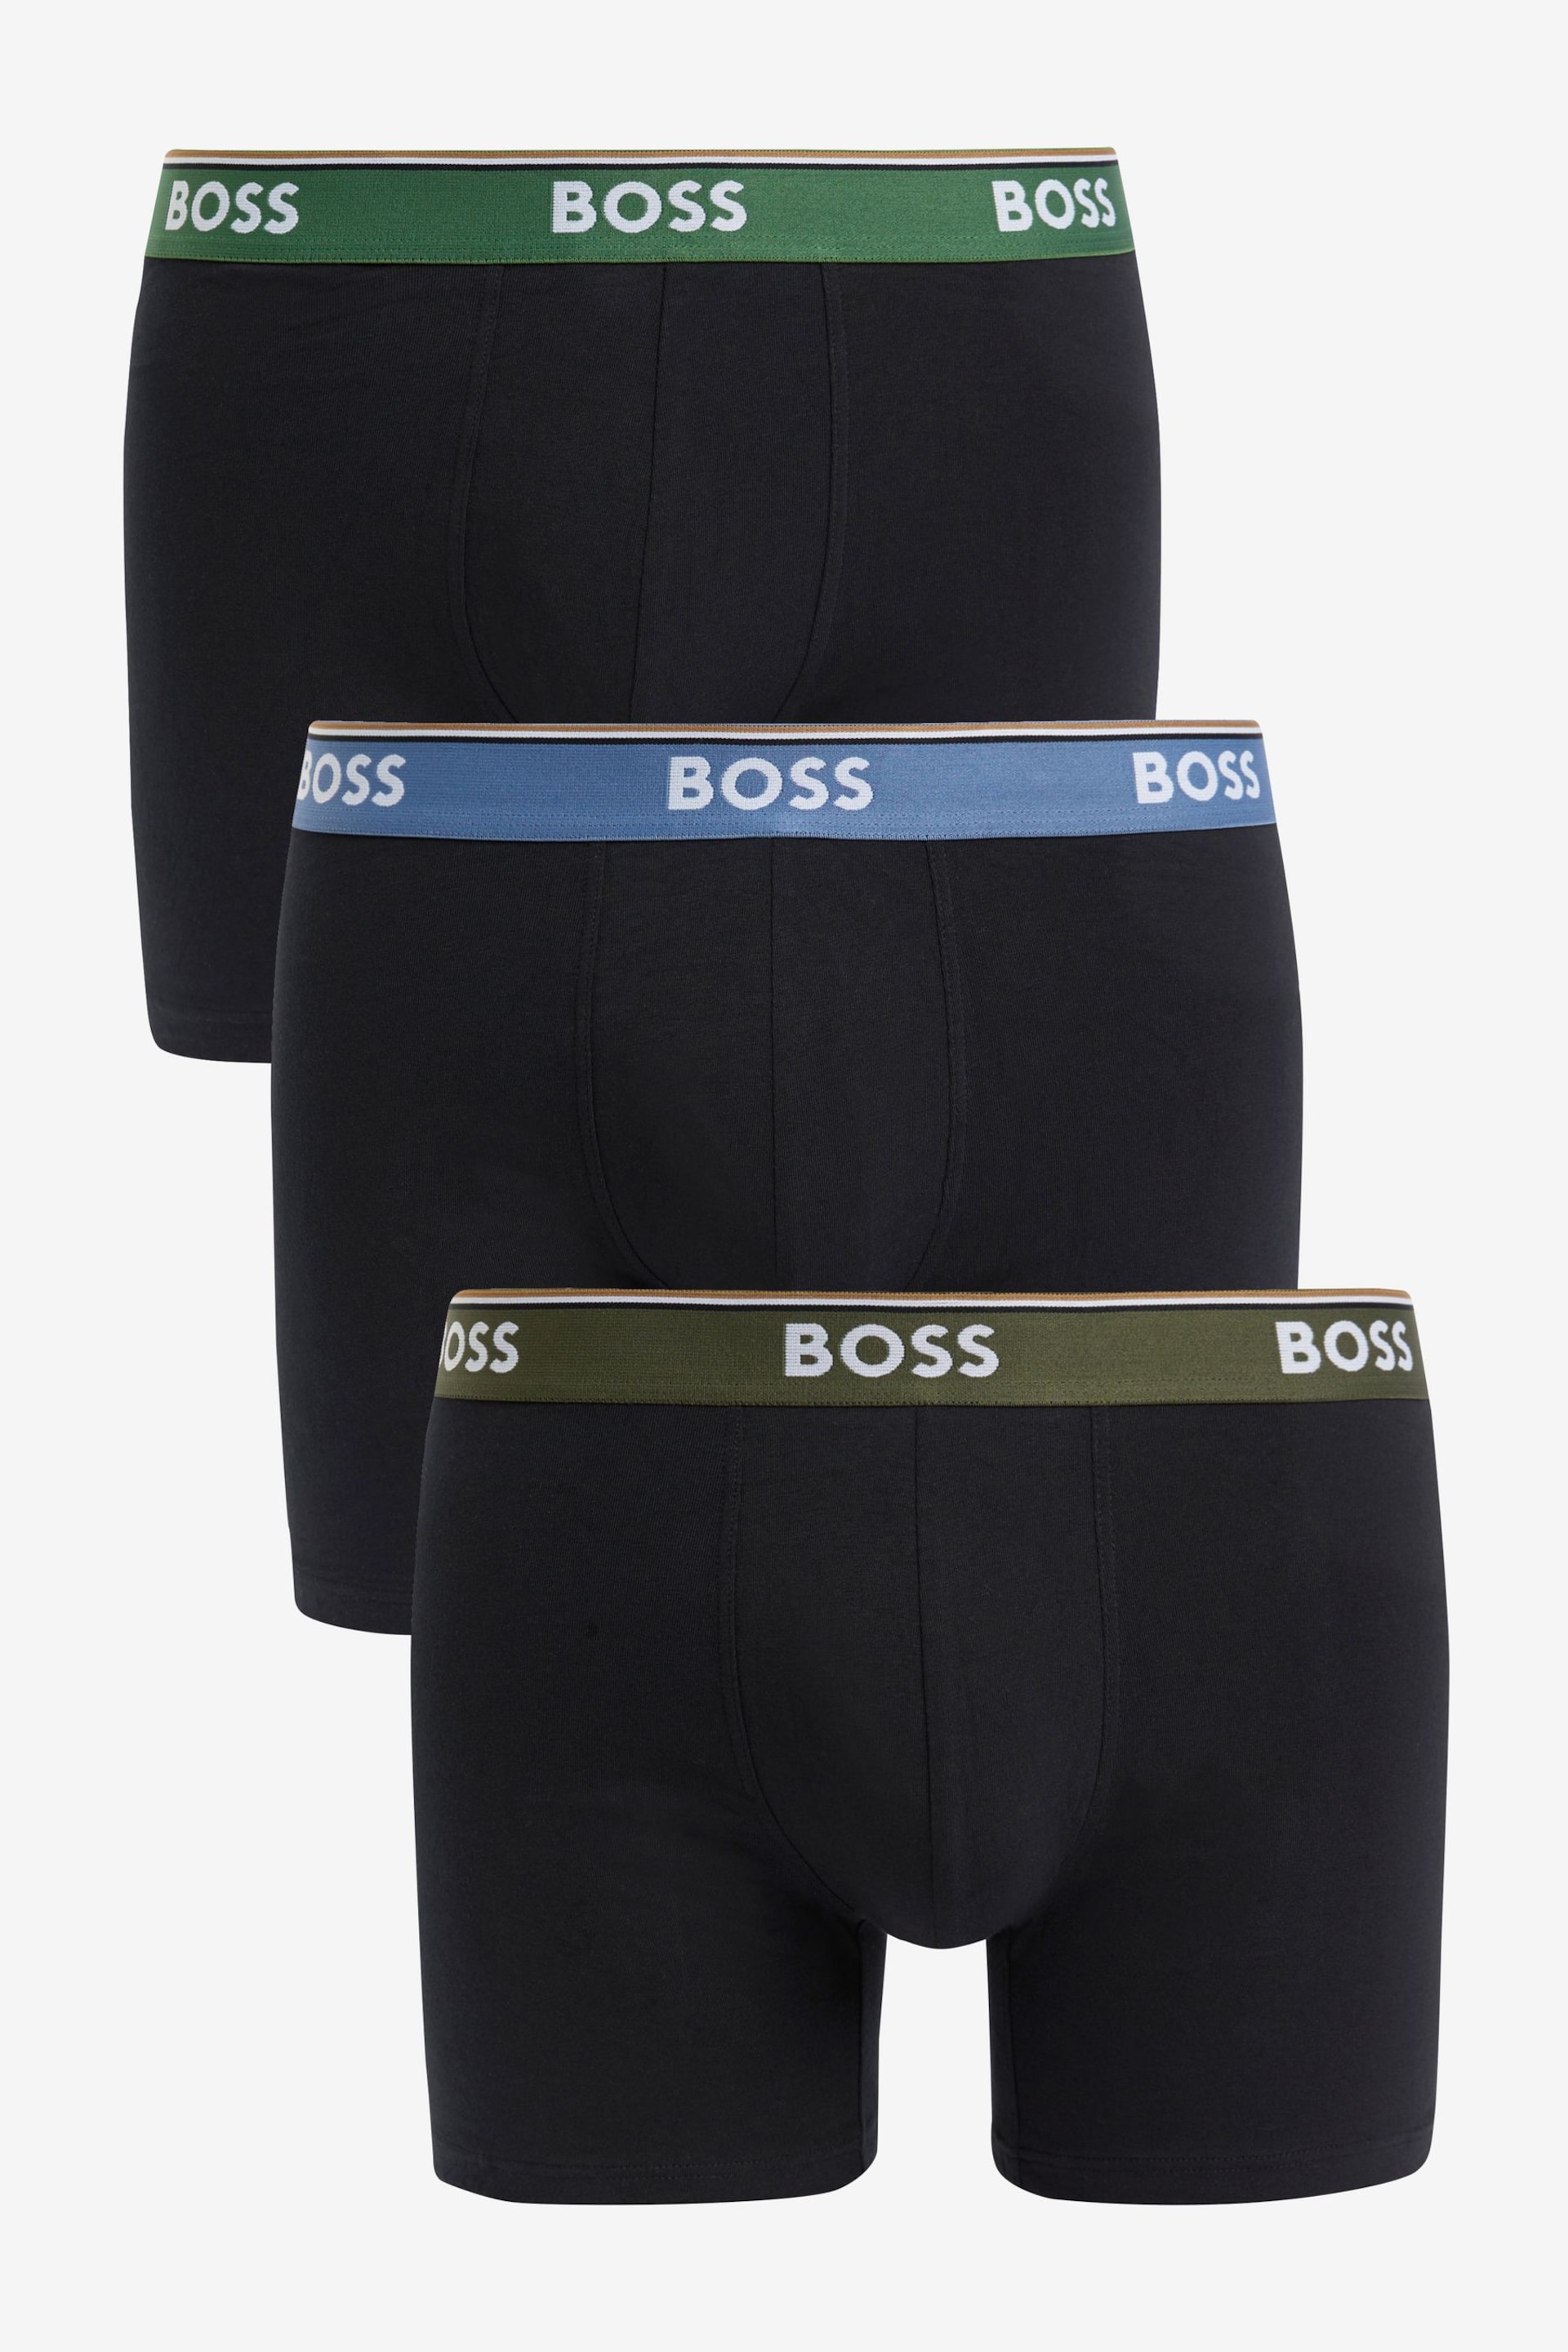 BOSS Black of Stretch-Cotton Boxer Briefs 3 Pack With Logos - Image 1 of 10